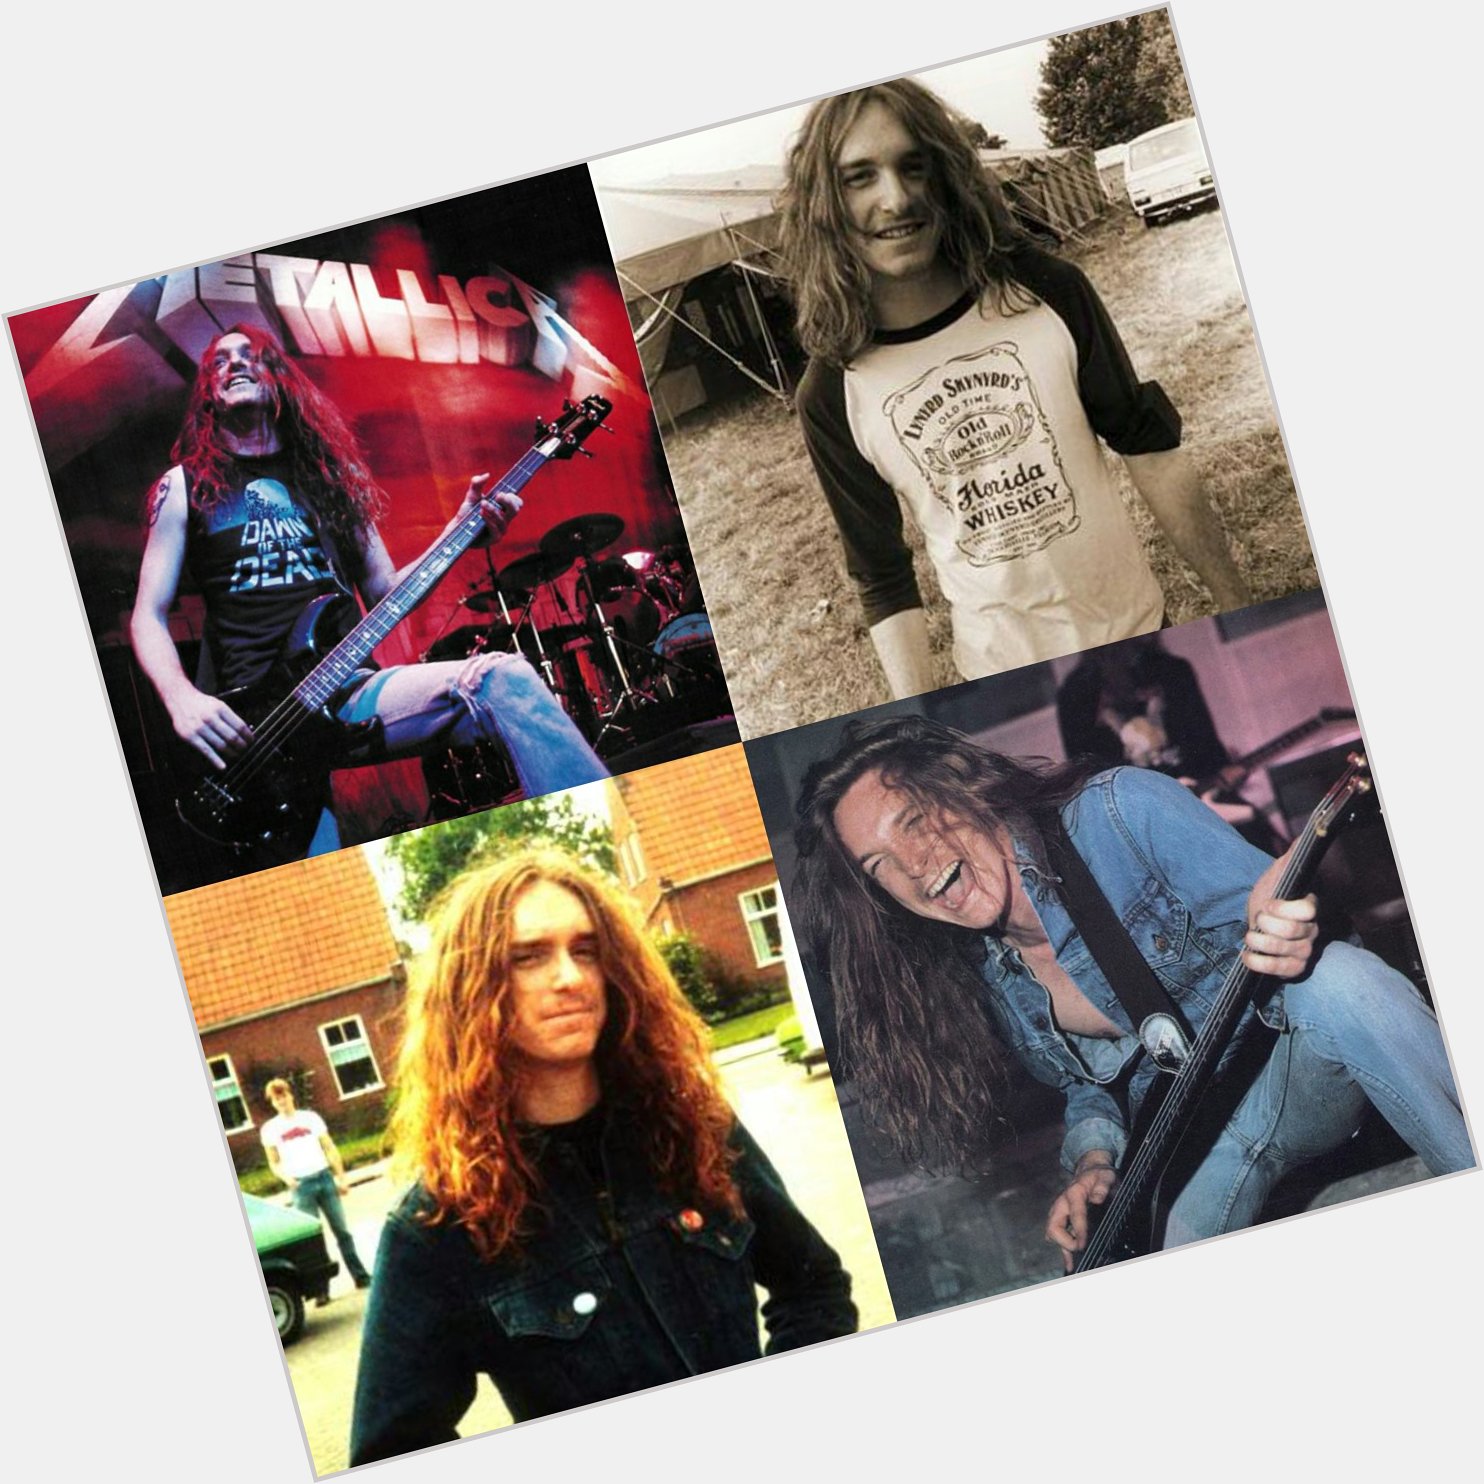 Happy Birthday to the late Cliff Burton.
Gone too soon and inspired many.
Cheers Cliff. 